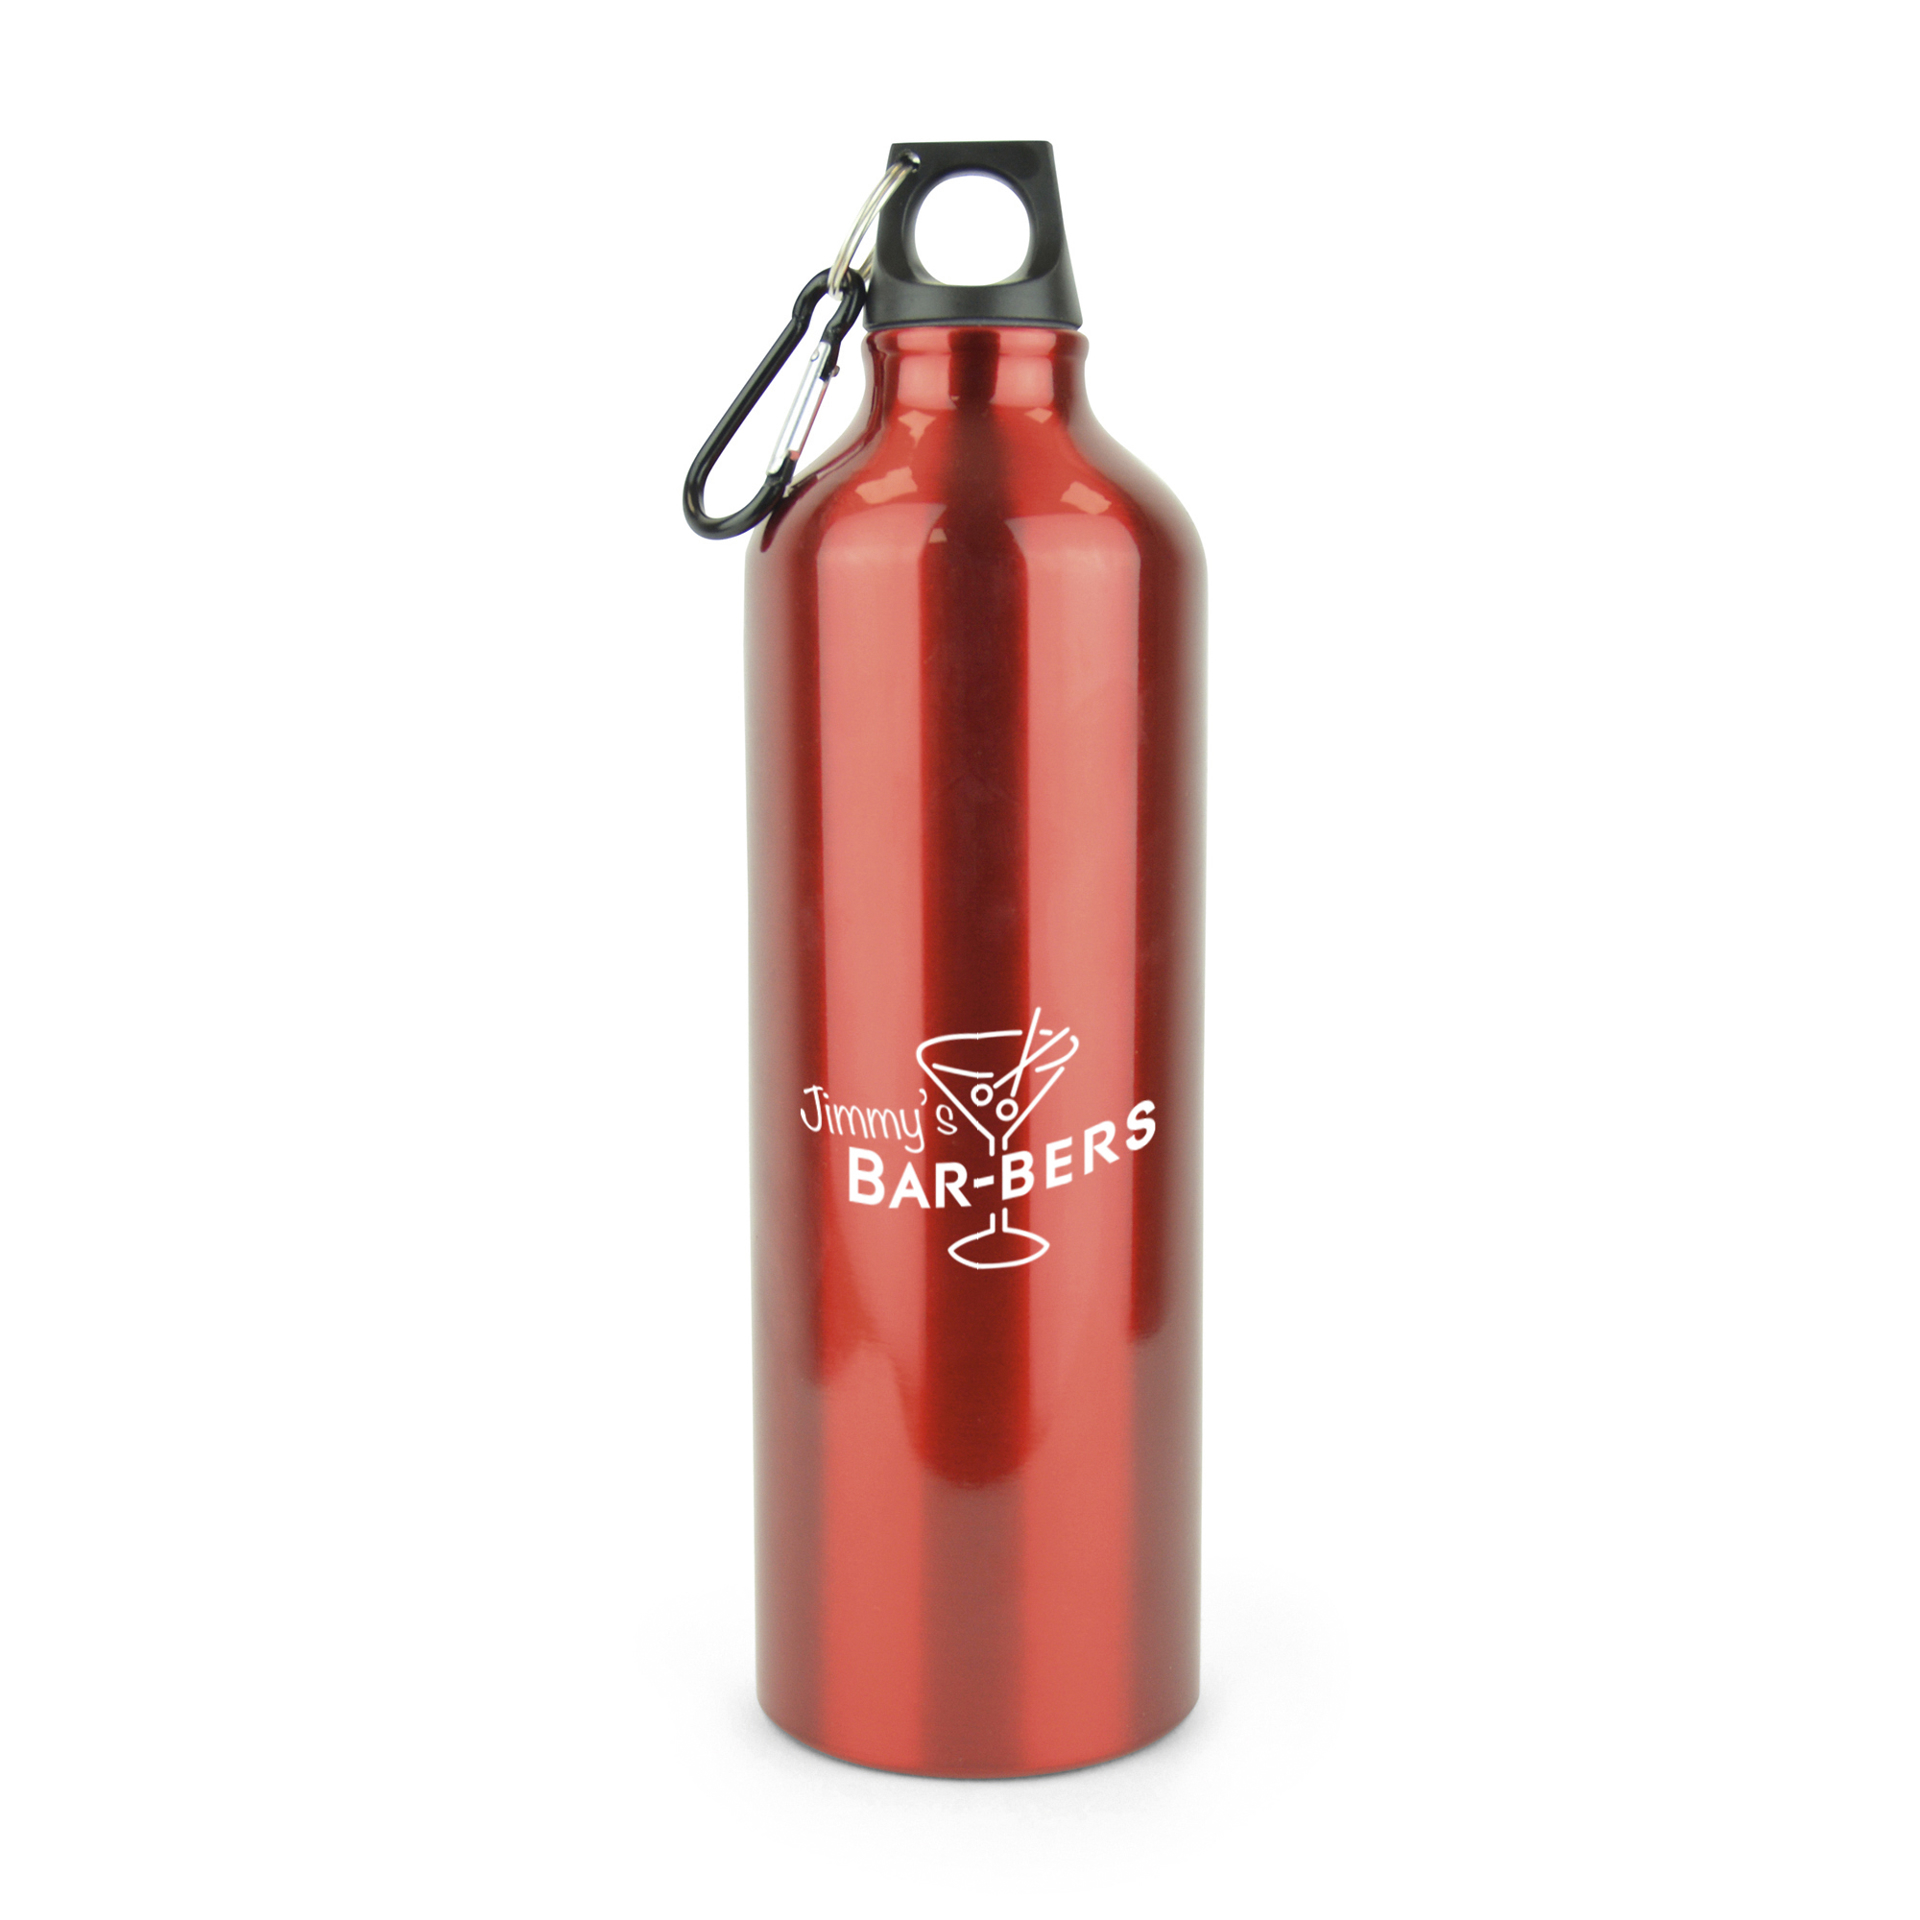 Herring - 750ml Aluminium Bottle in red with black lid and 1 colour print